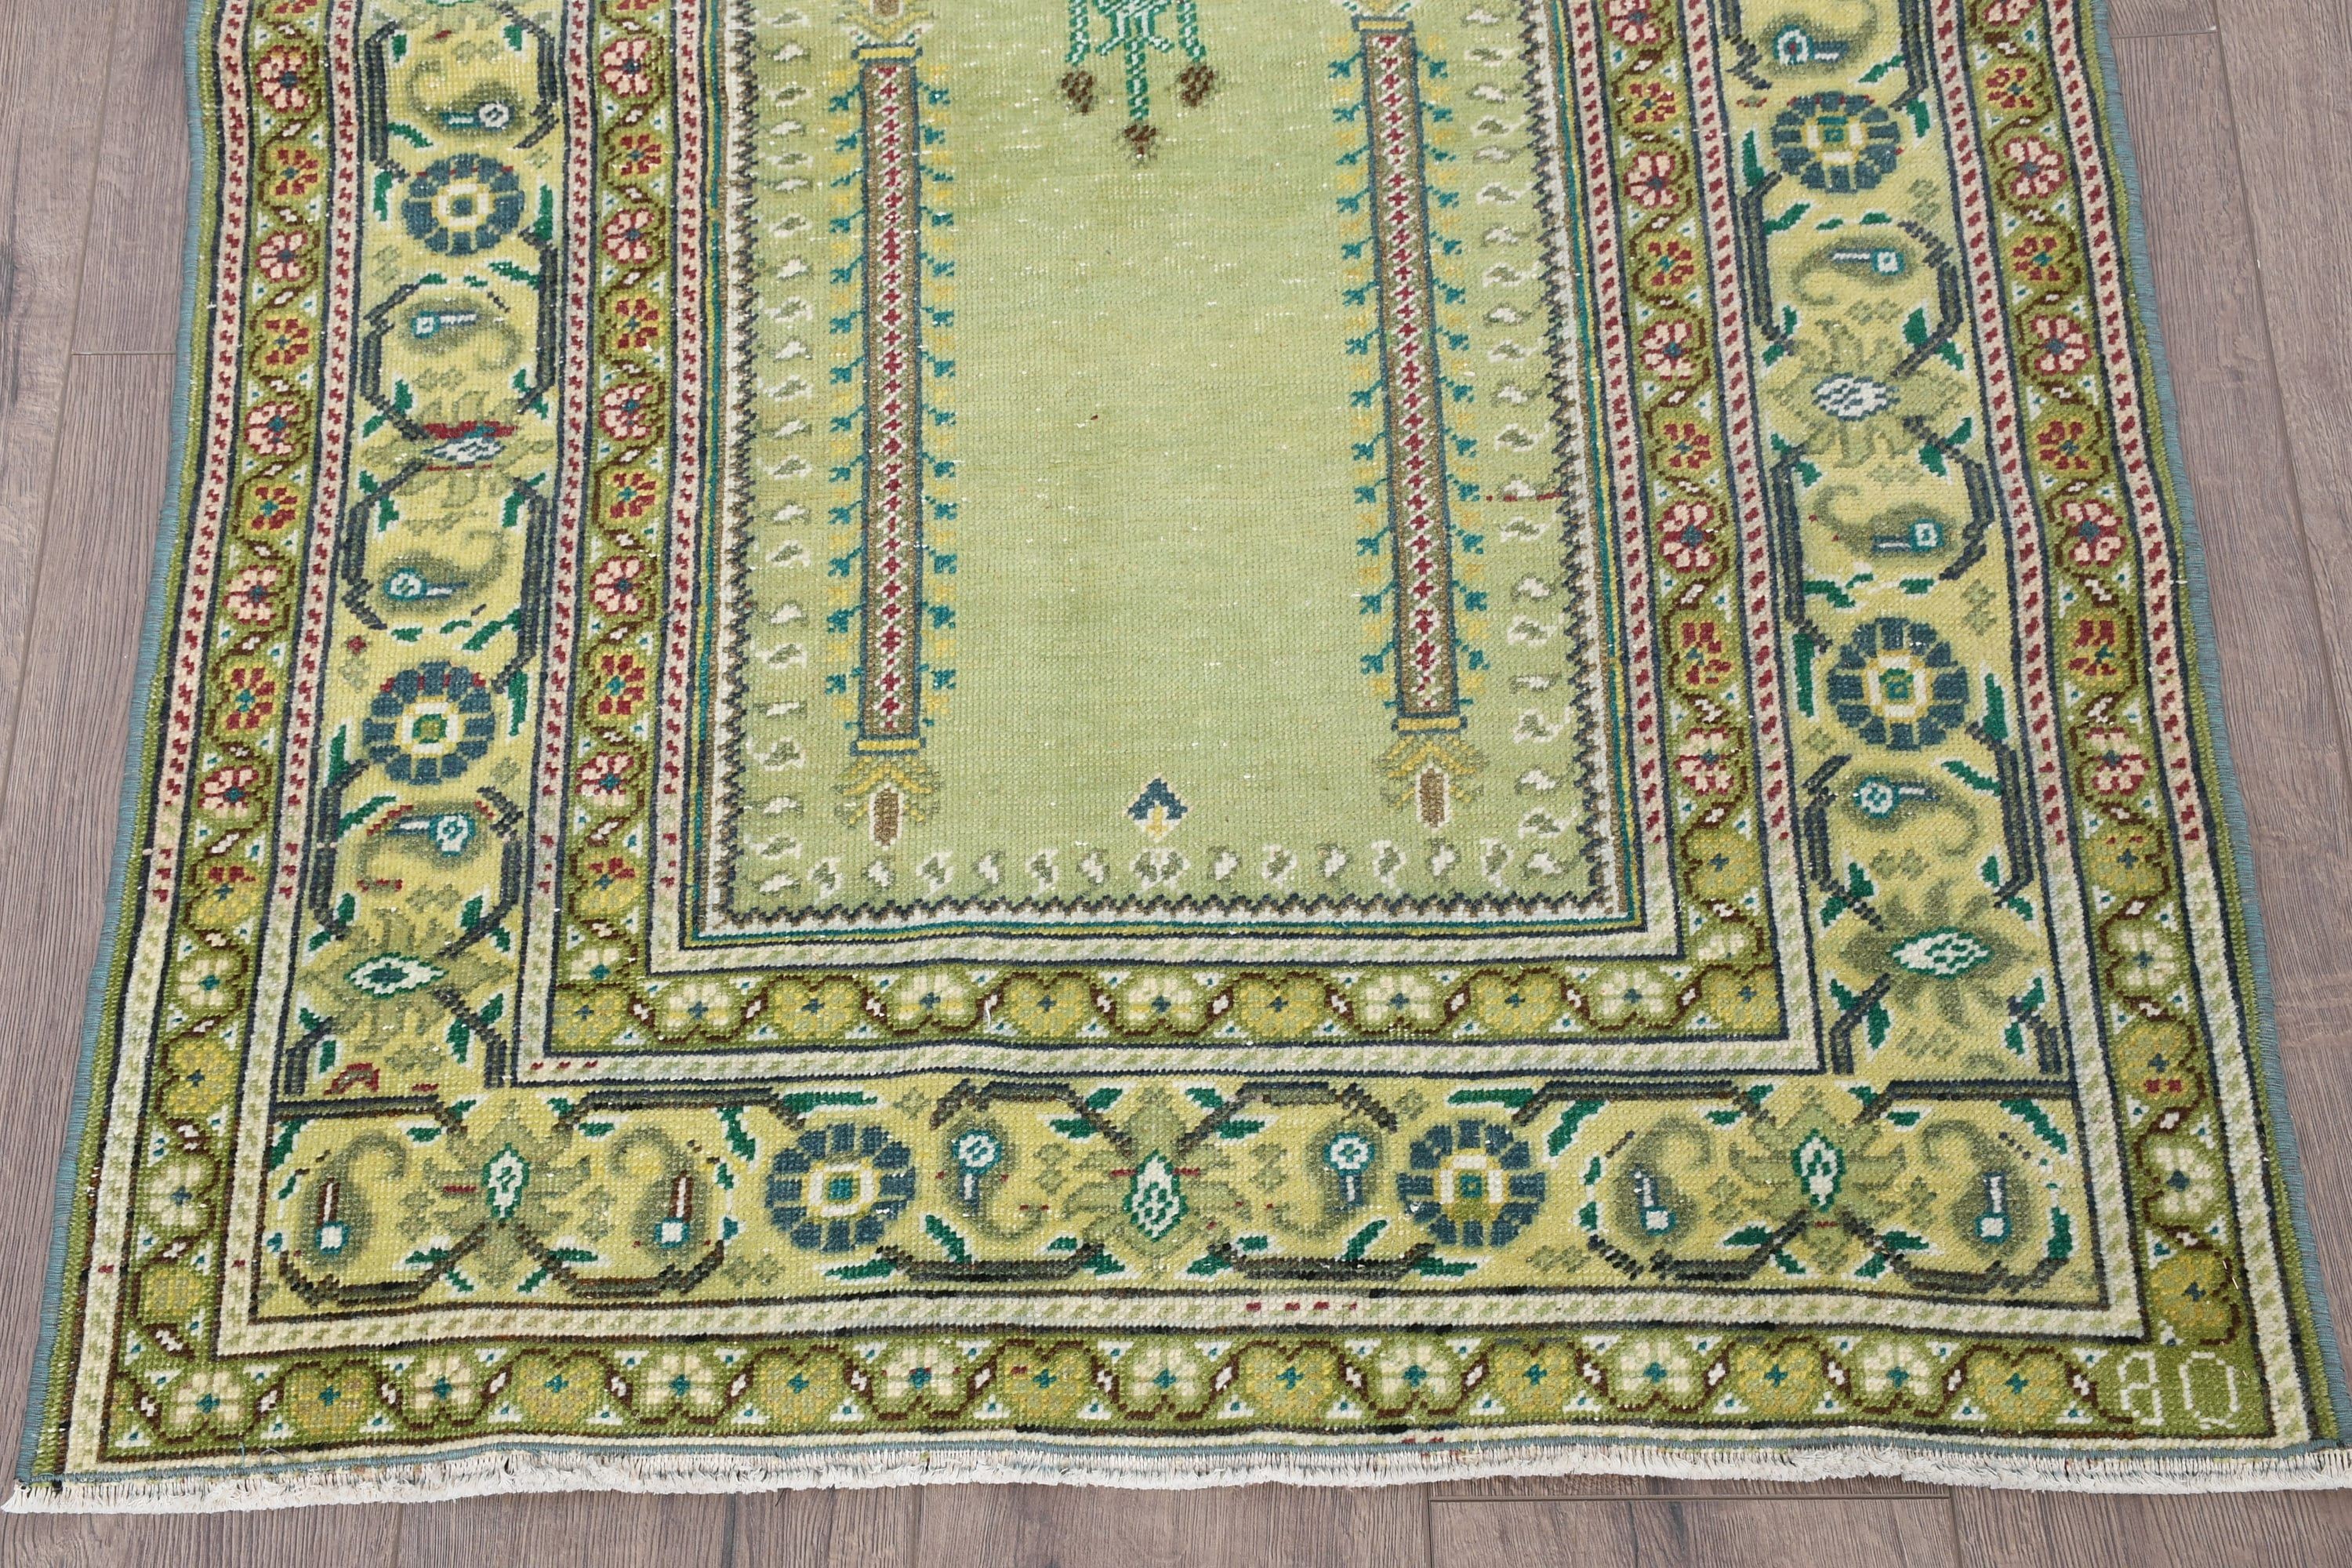 Antique Rugs, Turkish Rug, 2.8x4.1 ft Small Rug, Vintage Rug, Rugs for Kitchen, Green Bedroom Rugs, Hand Knotted Rug, Oushak Rugs, Bath Rug